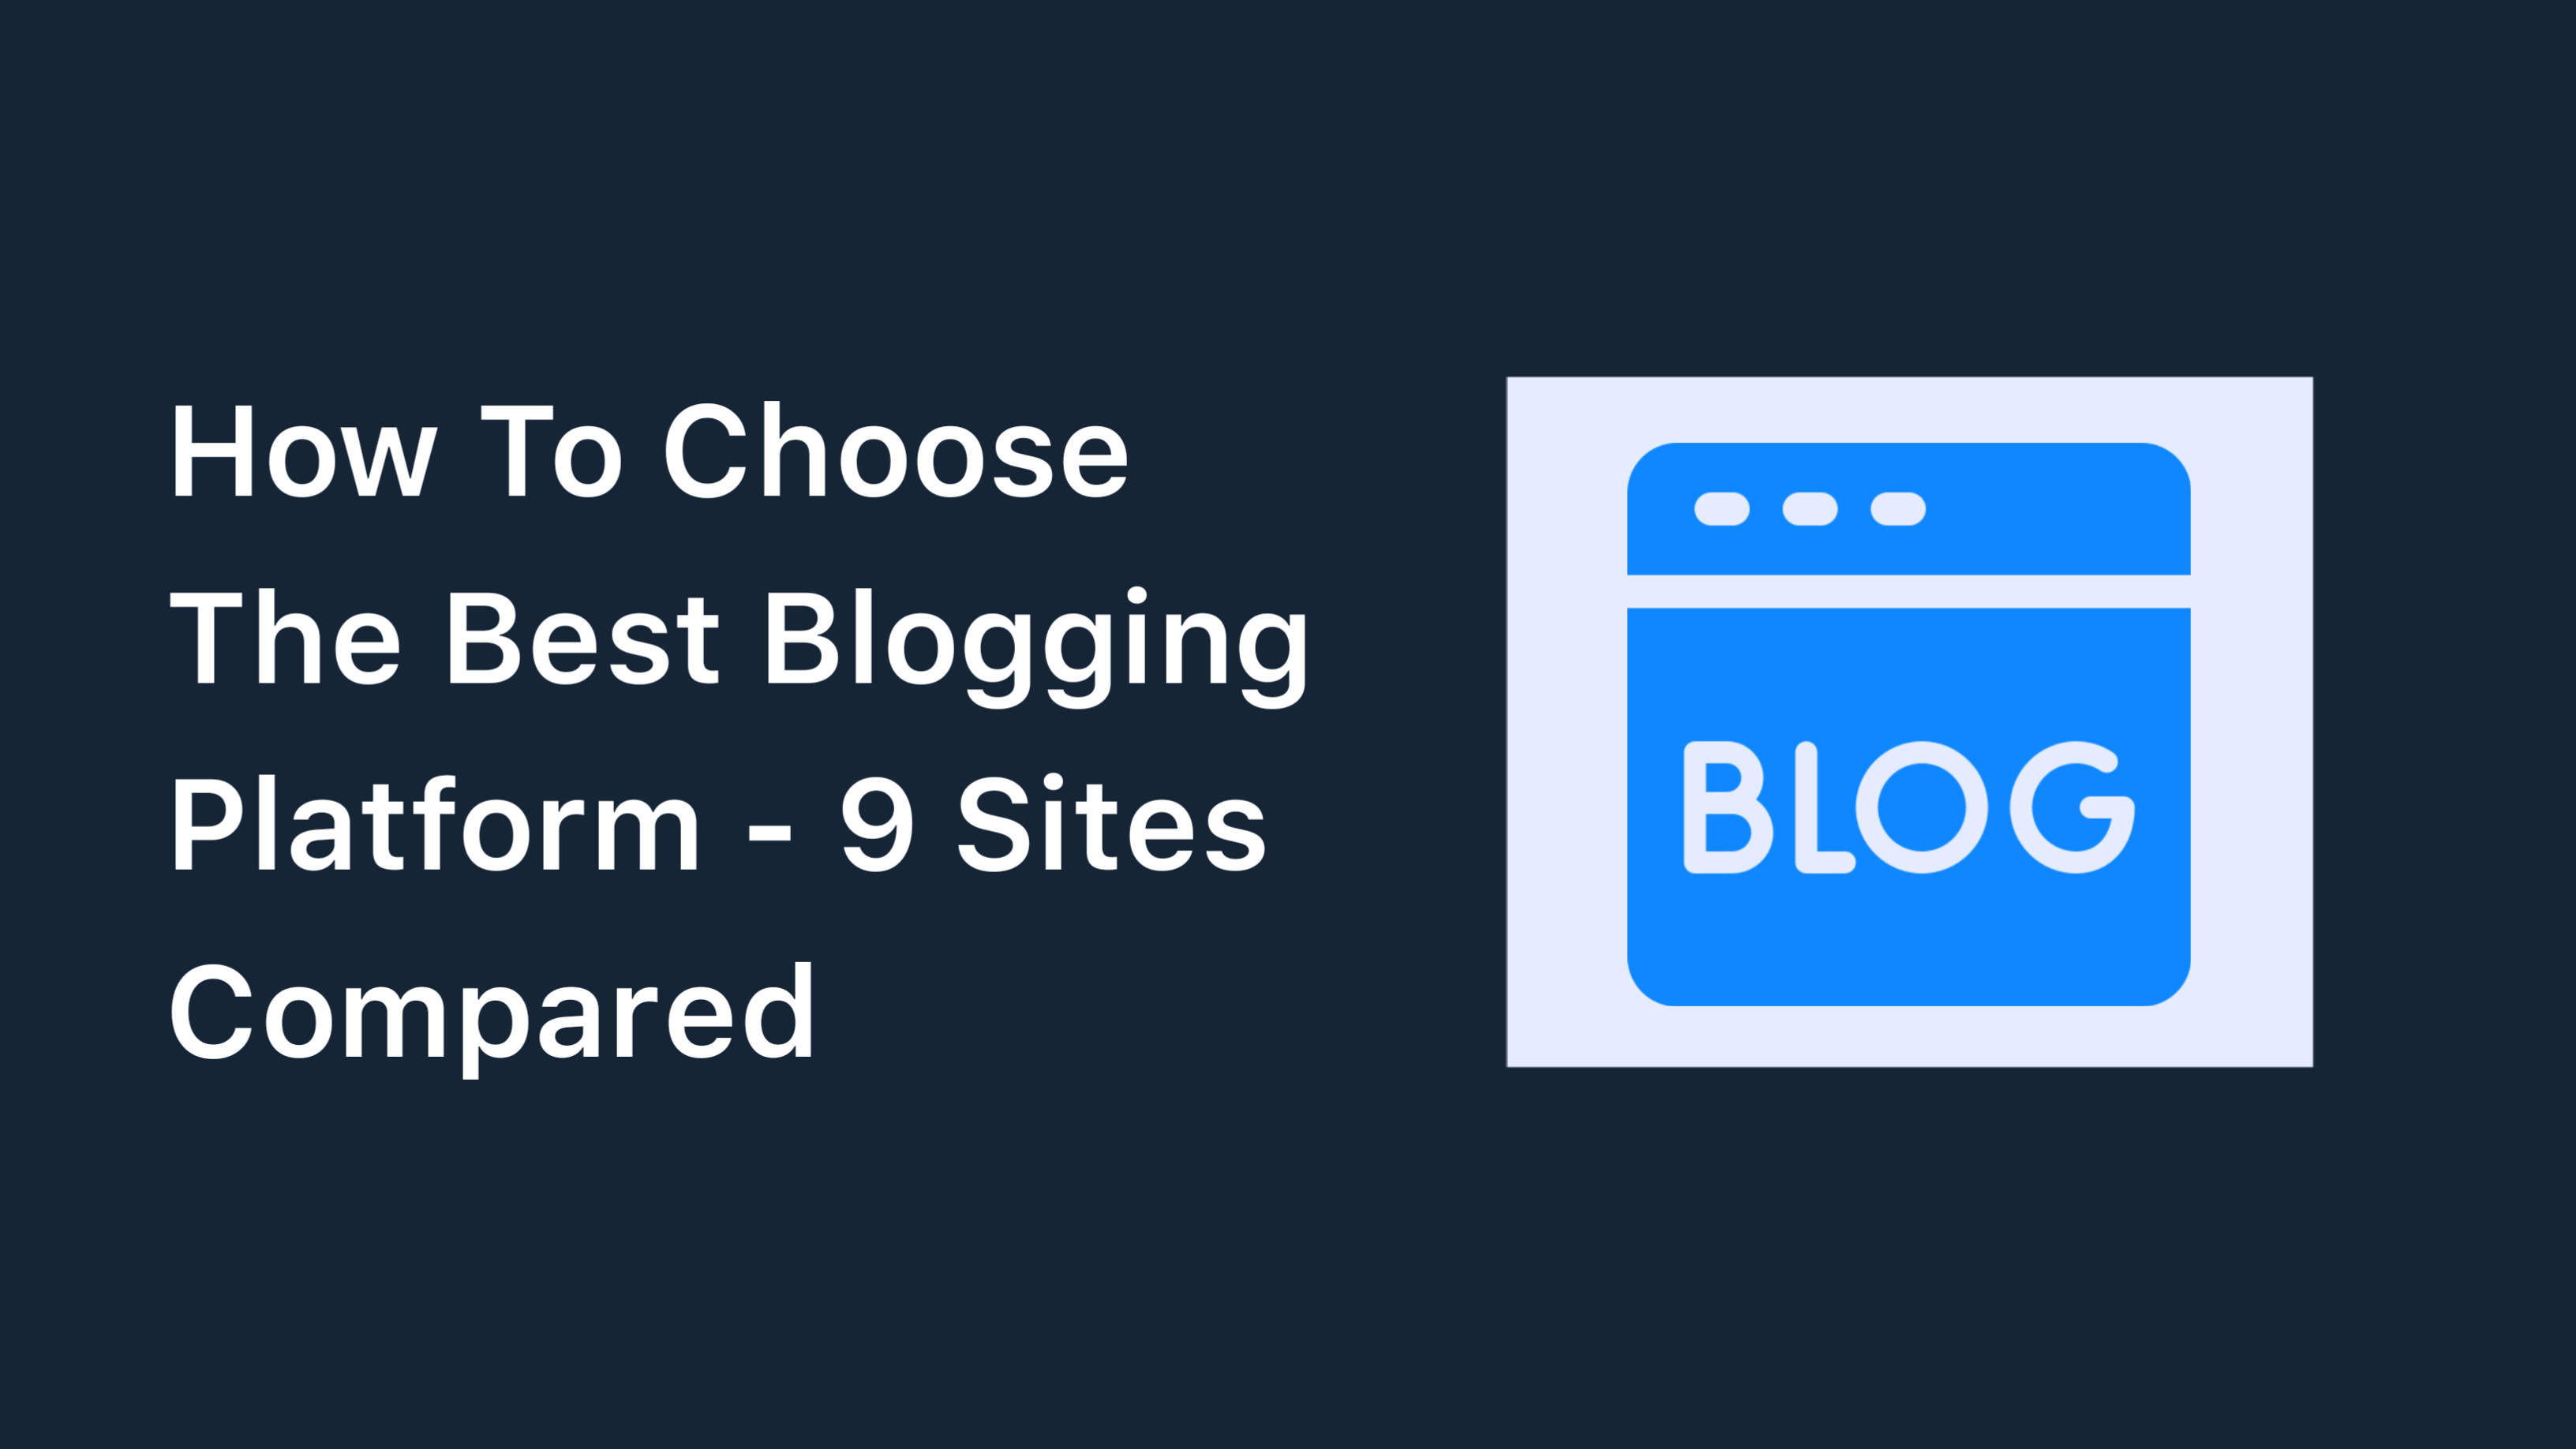 How To Choose The Best Blogging Platform - 9 Sites Compared